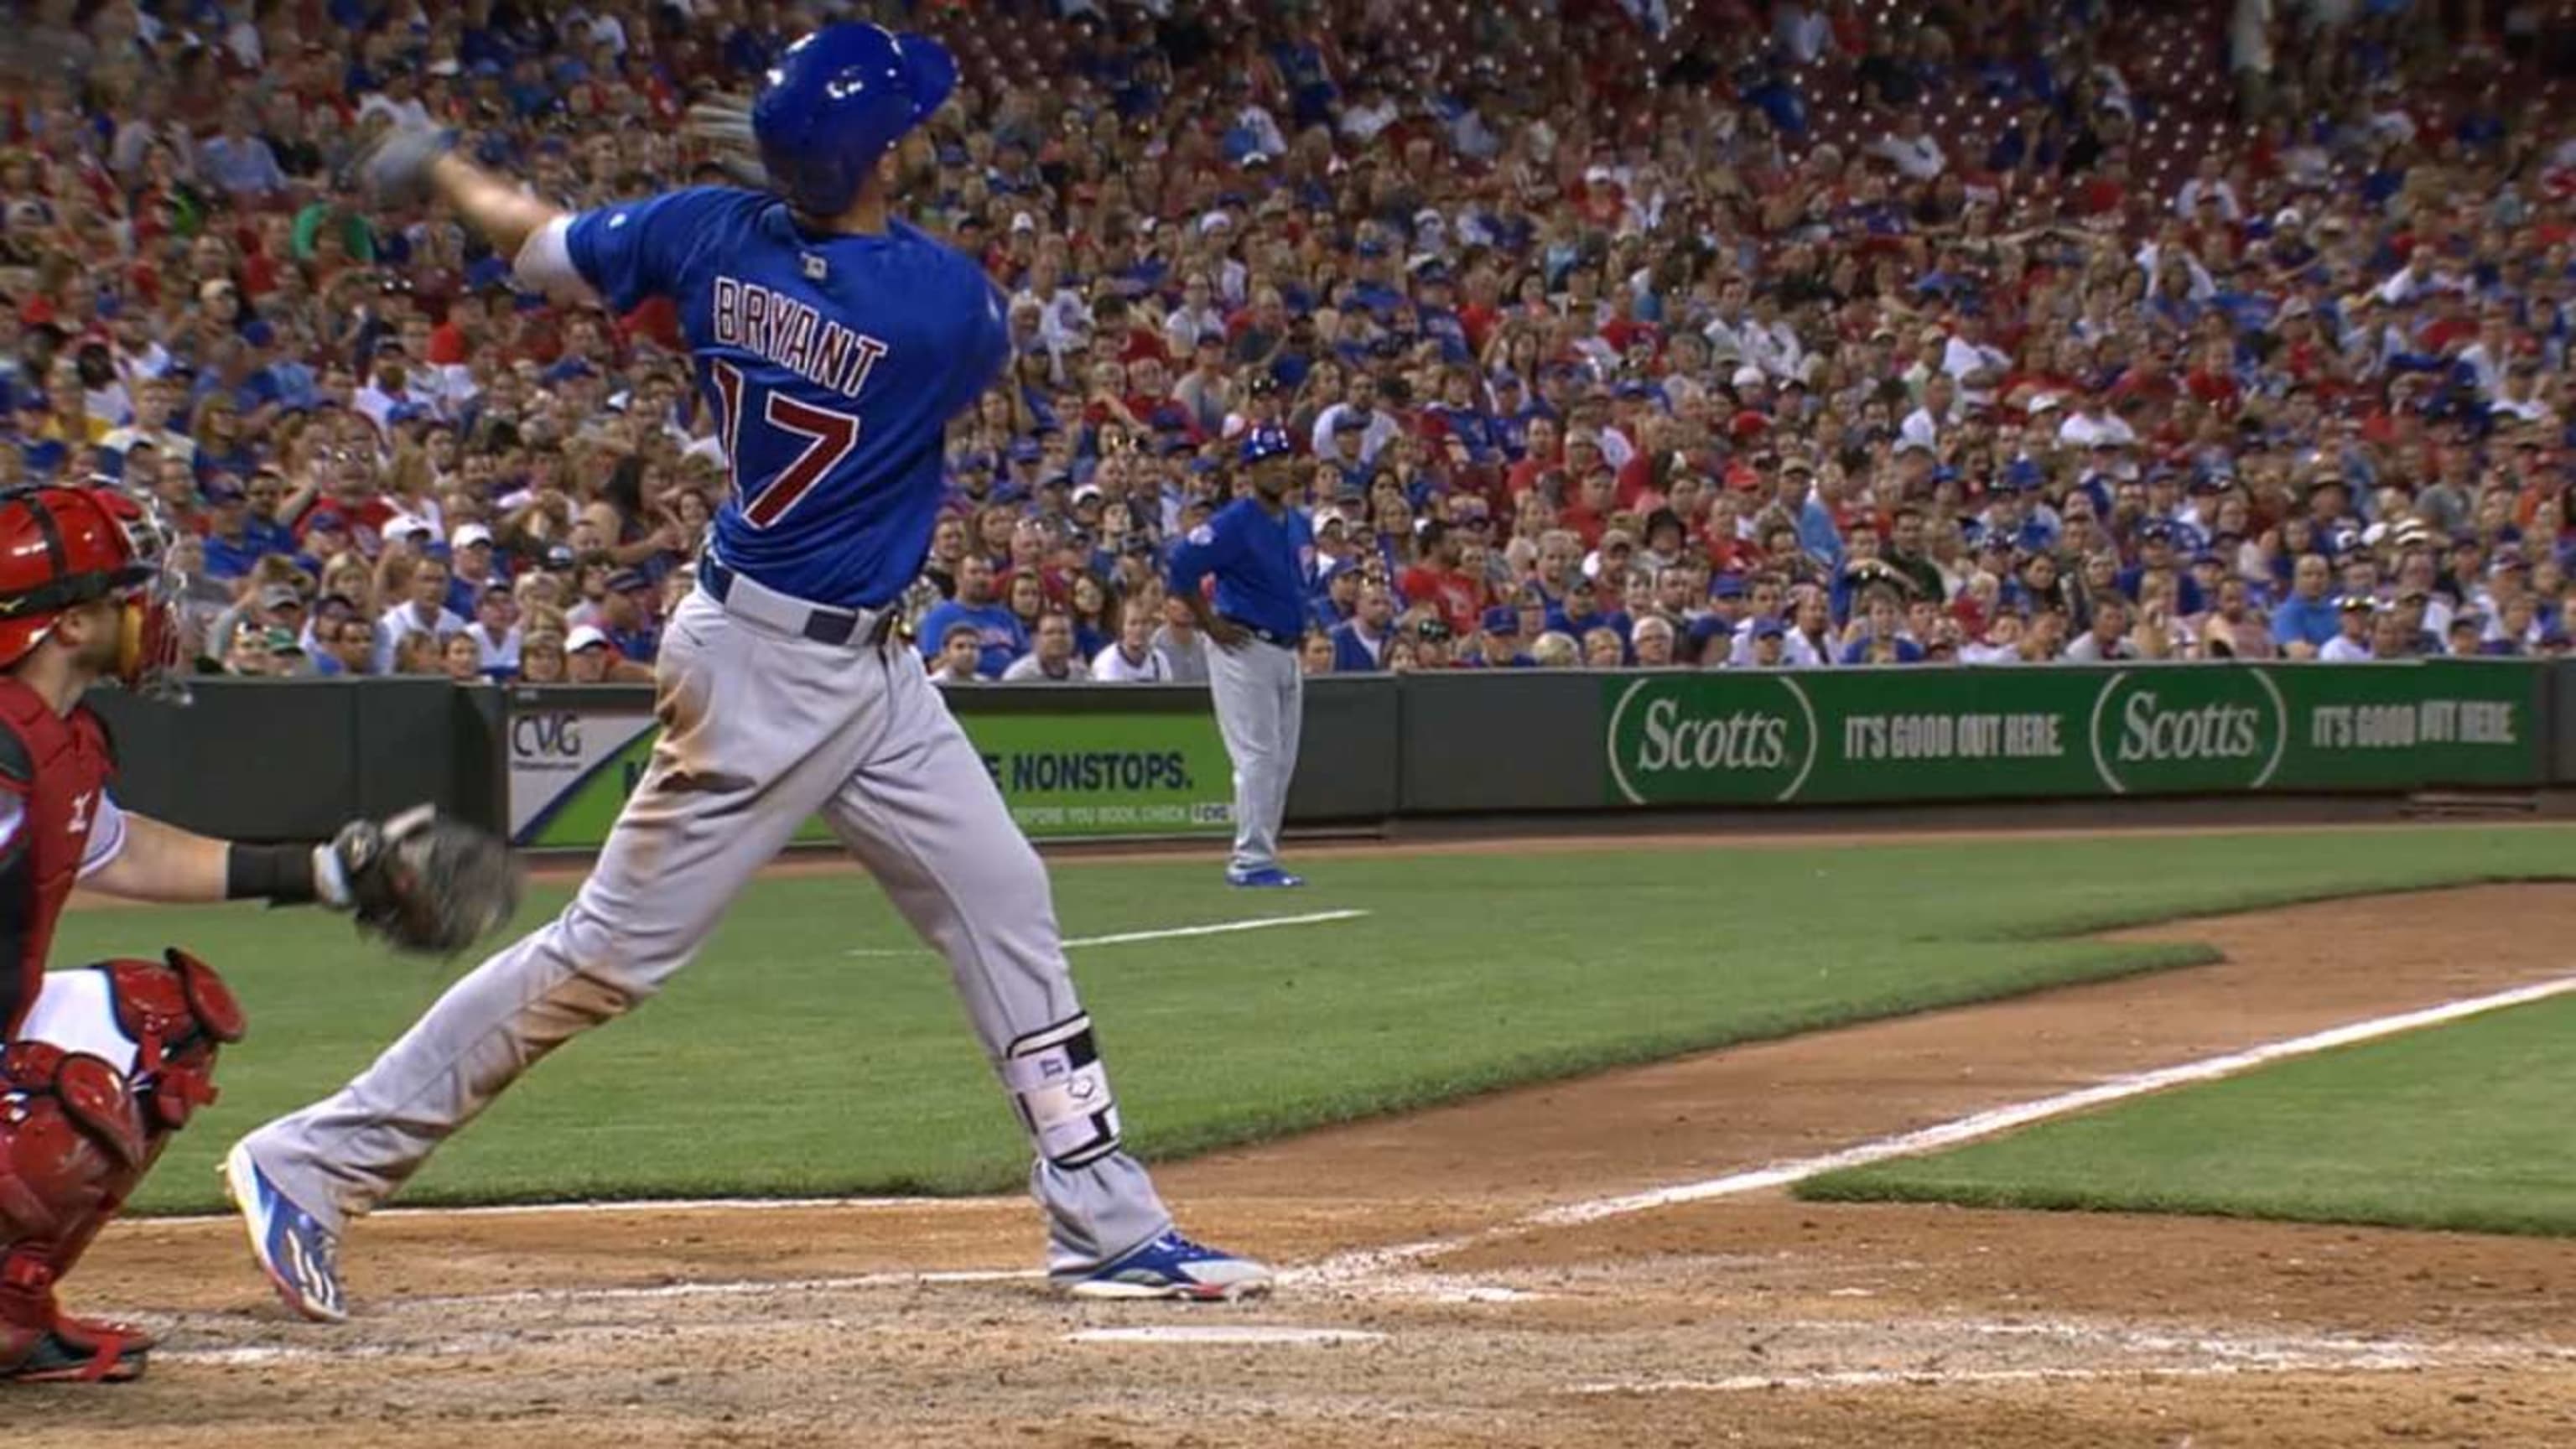 Cubs phenom Kris Bryant makes MLB debut, strikes out first 3 at-bats